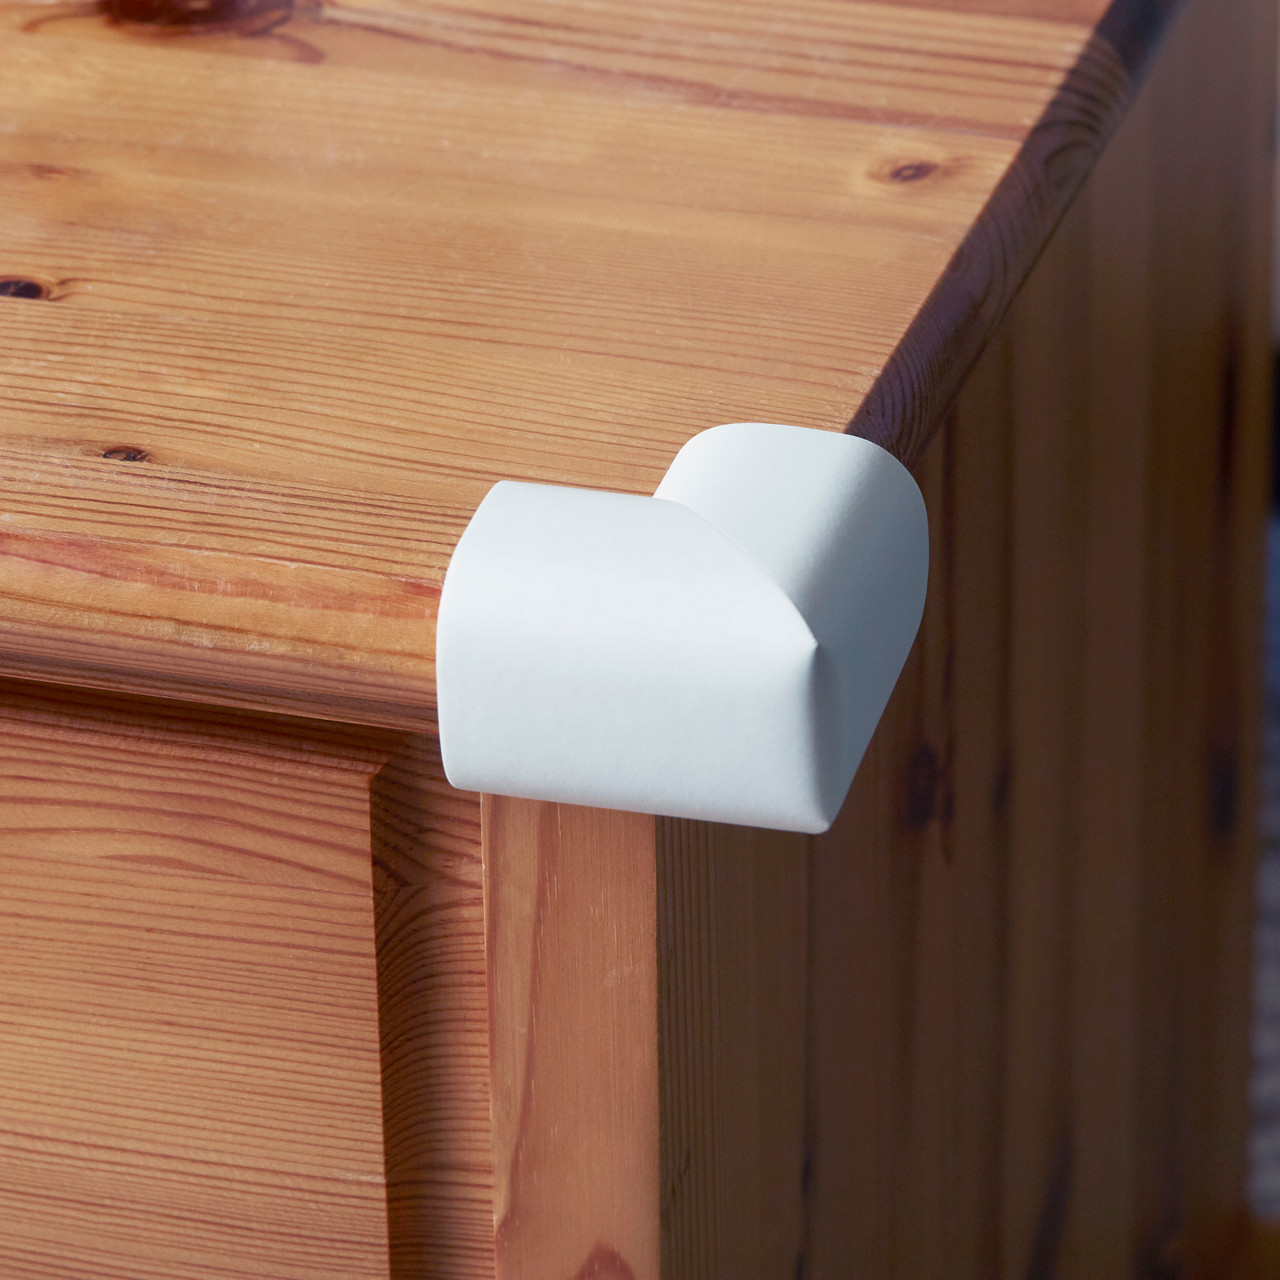 PVC Baby Proofing Corner Guards Edge Protector, For Sharp Corners